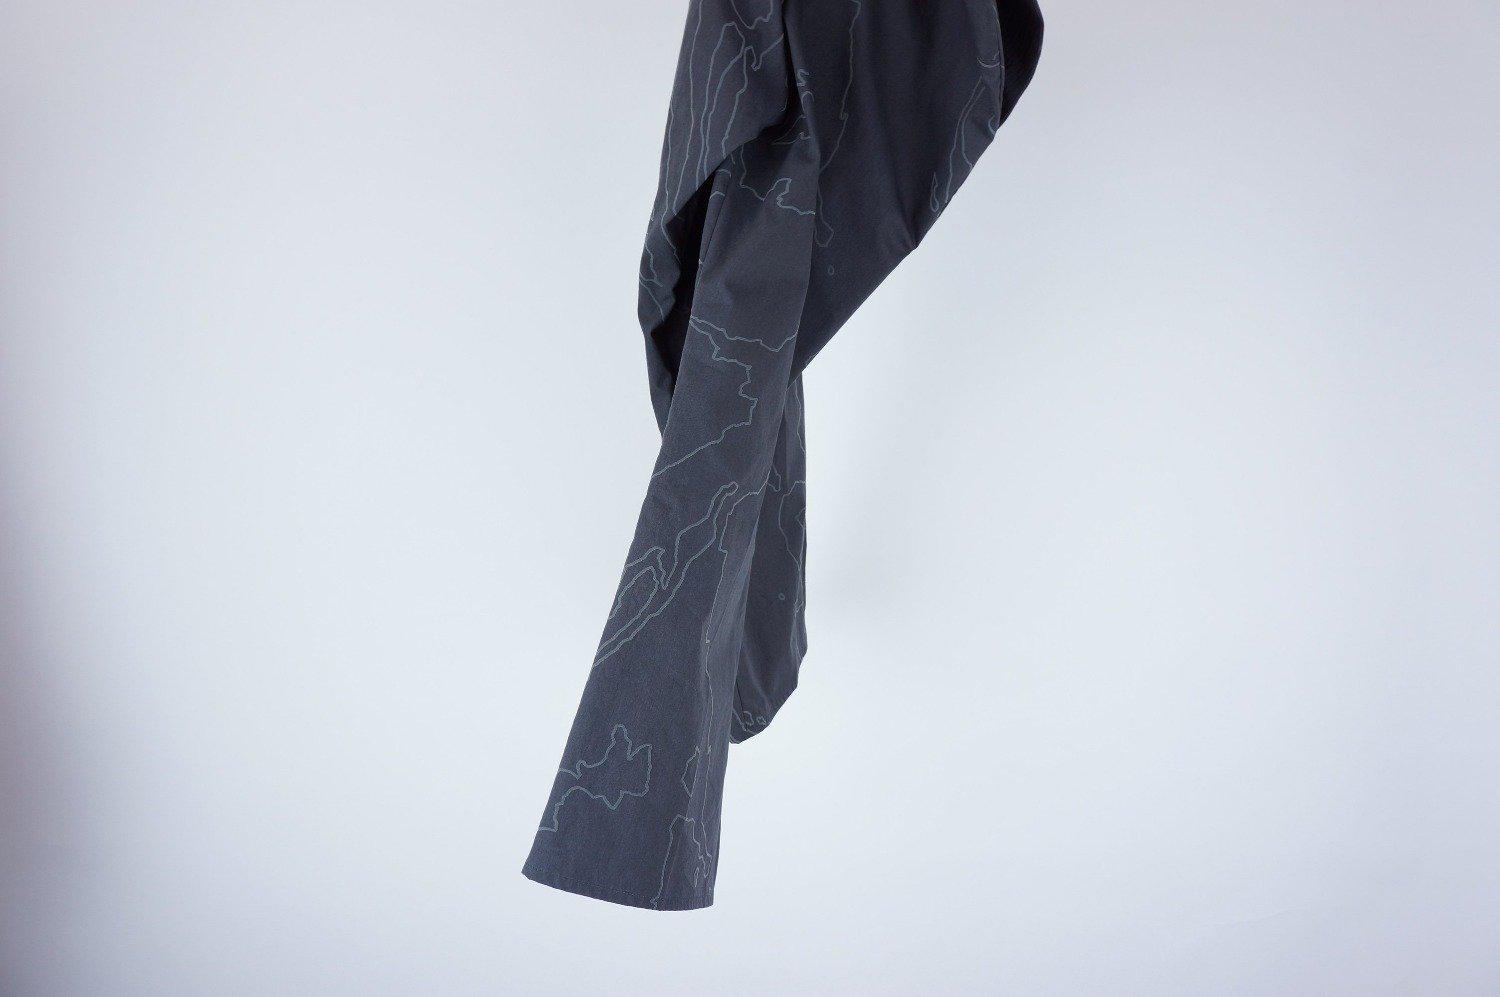 Rias Trousers / CHARCOAL